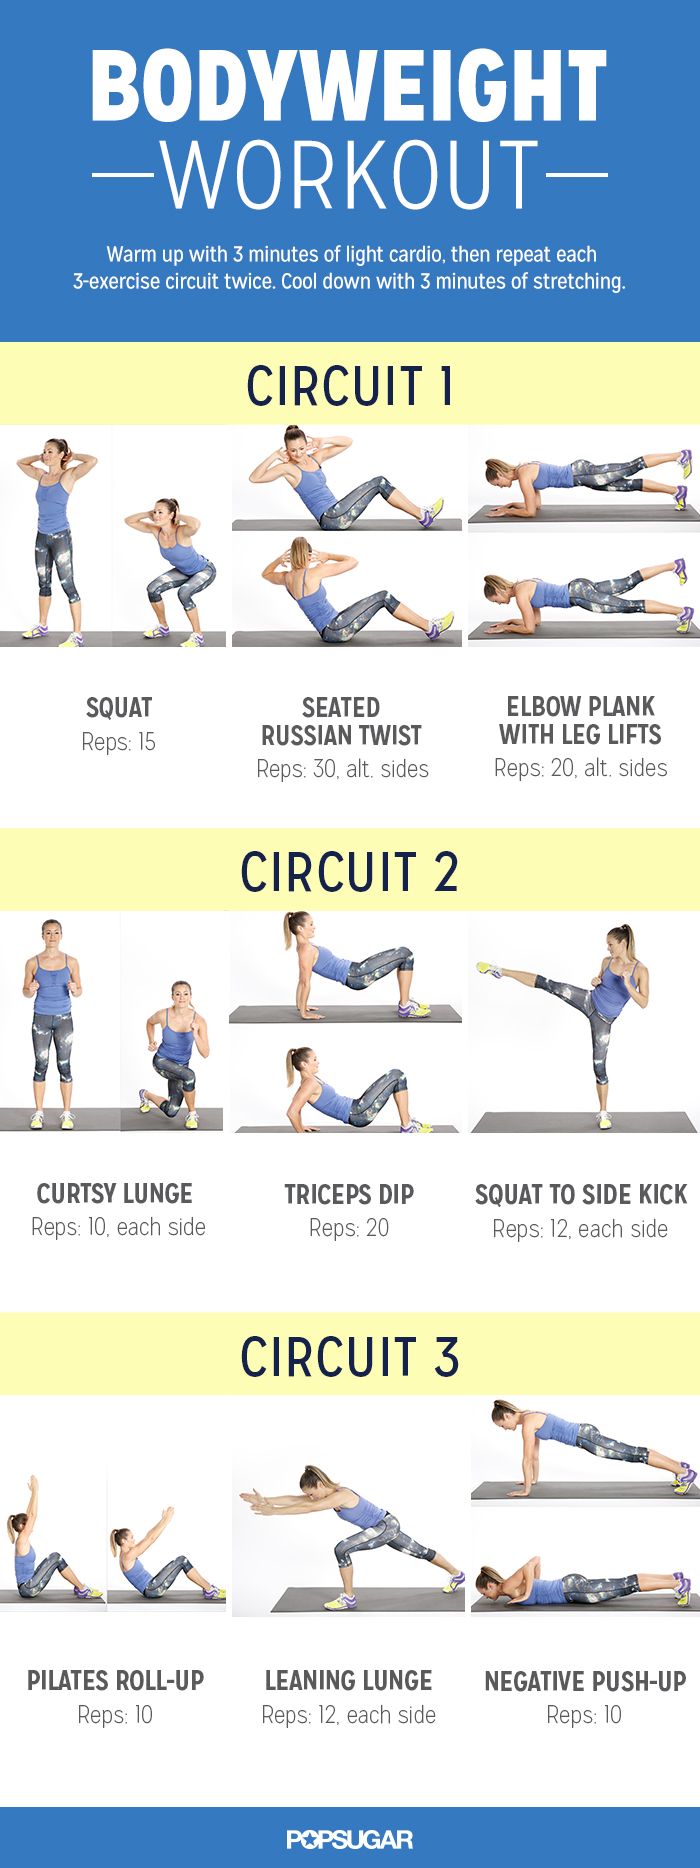 6 Day Full Body Workout With Weights Reddit for Women